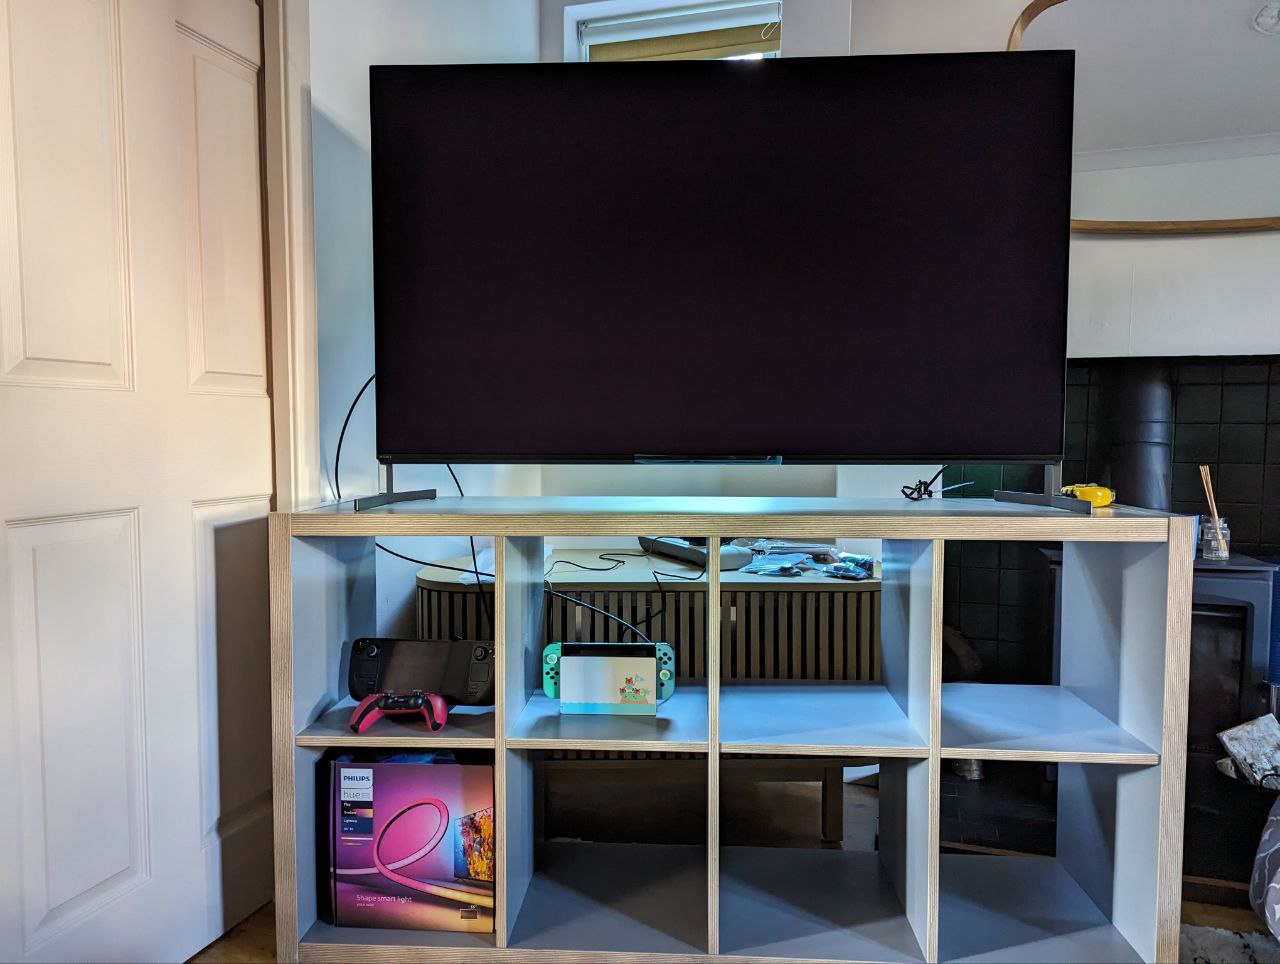 A 55 inch Sony Bravia TV on top of an IKEA Kallax shelving unit, which is laid horizontally a little awkwardly. Behind the Kallax, you can see the new TV stand which is not wide enough to hold the TV, which annoyingly has legs that are the width of the TV, instead of being in the centre